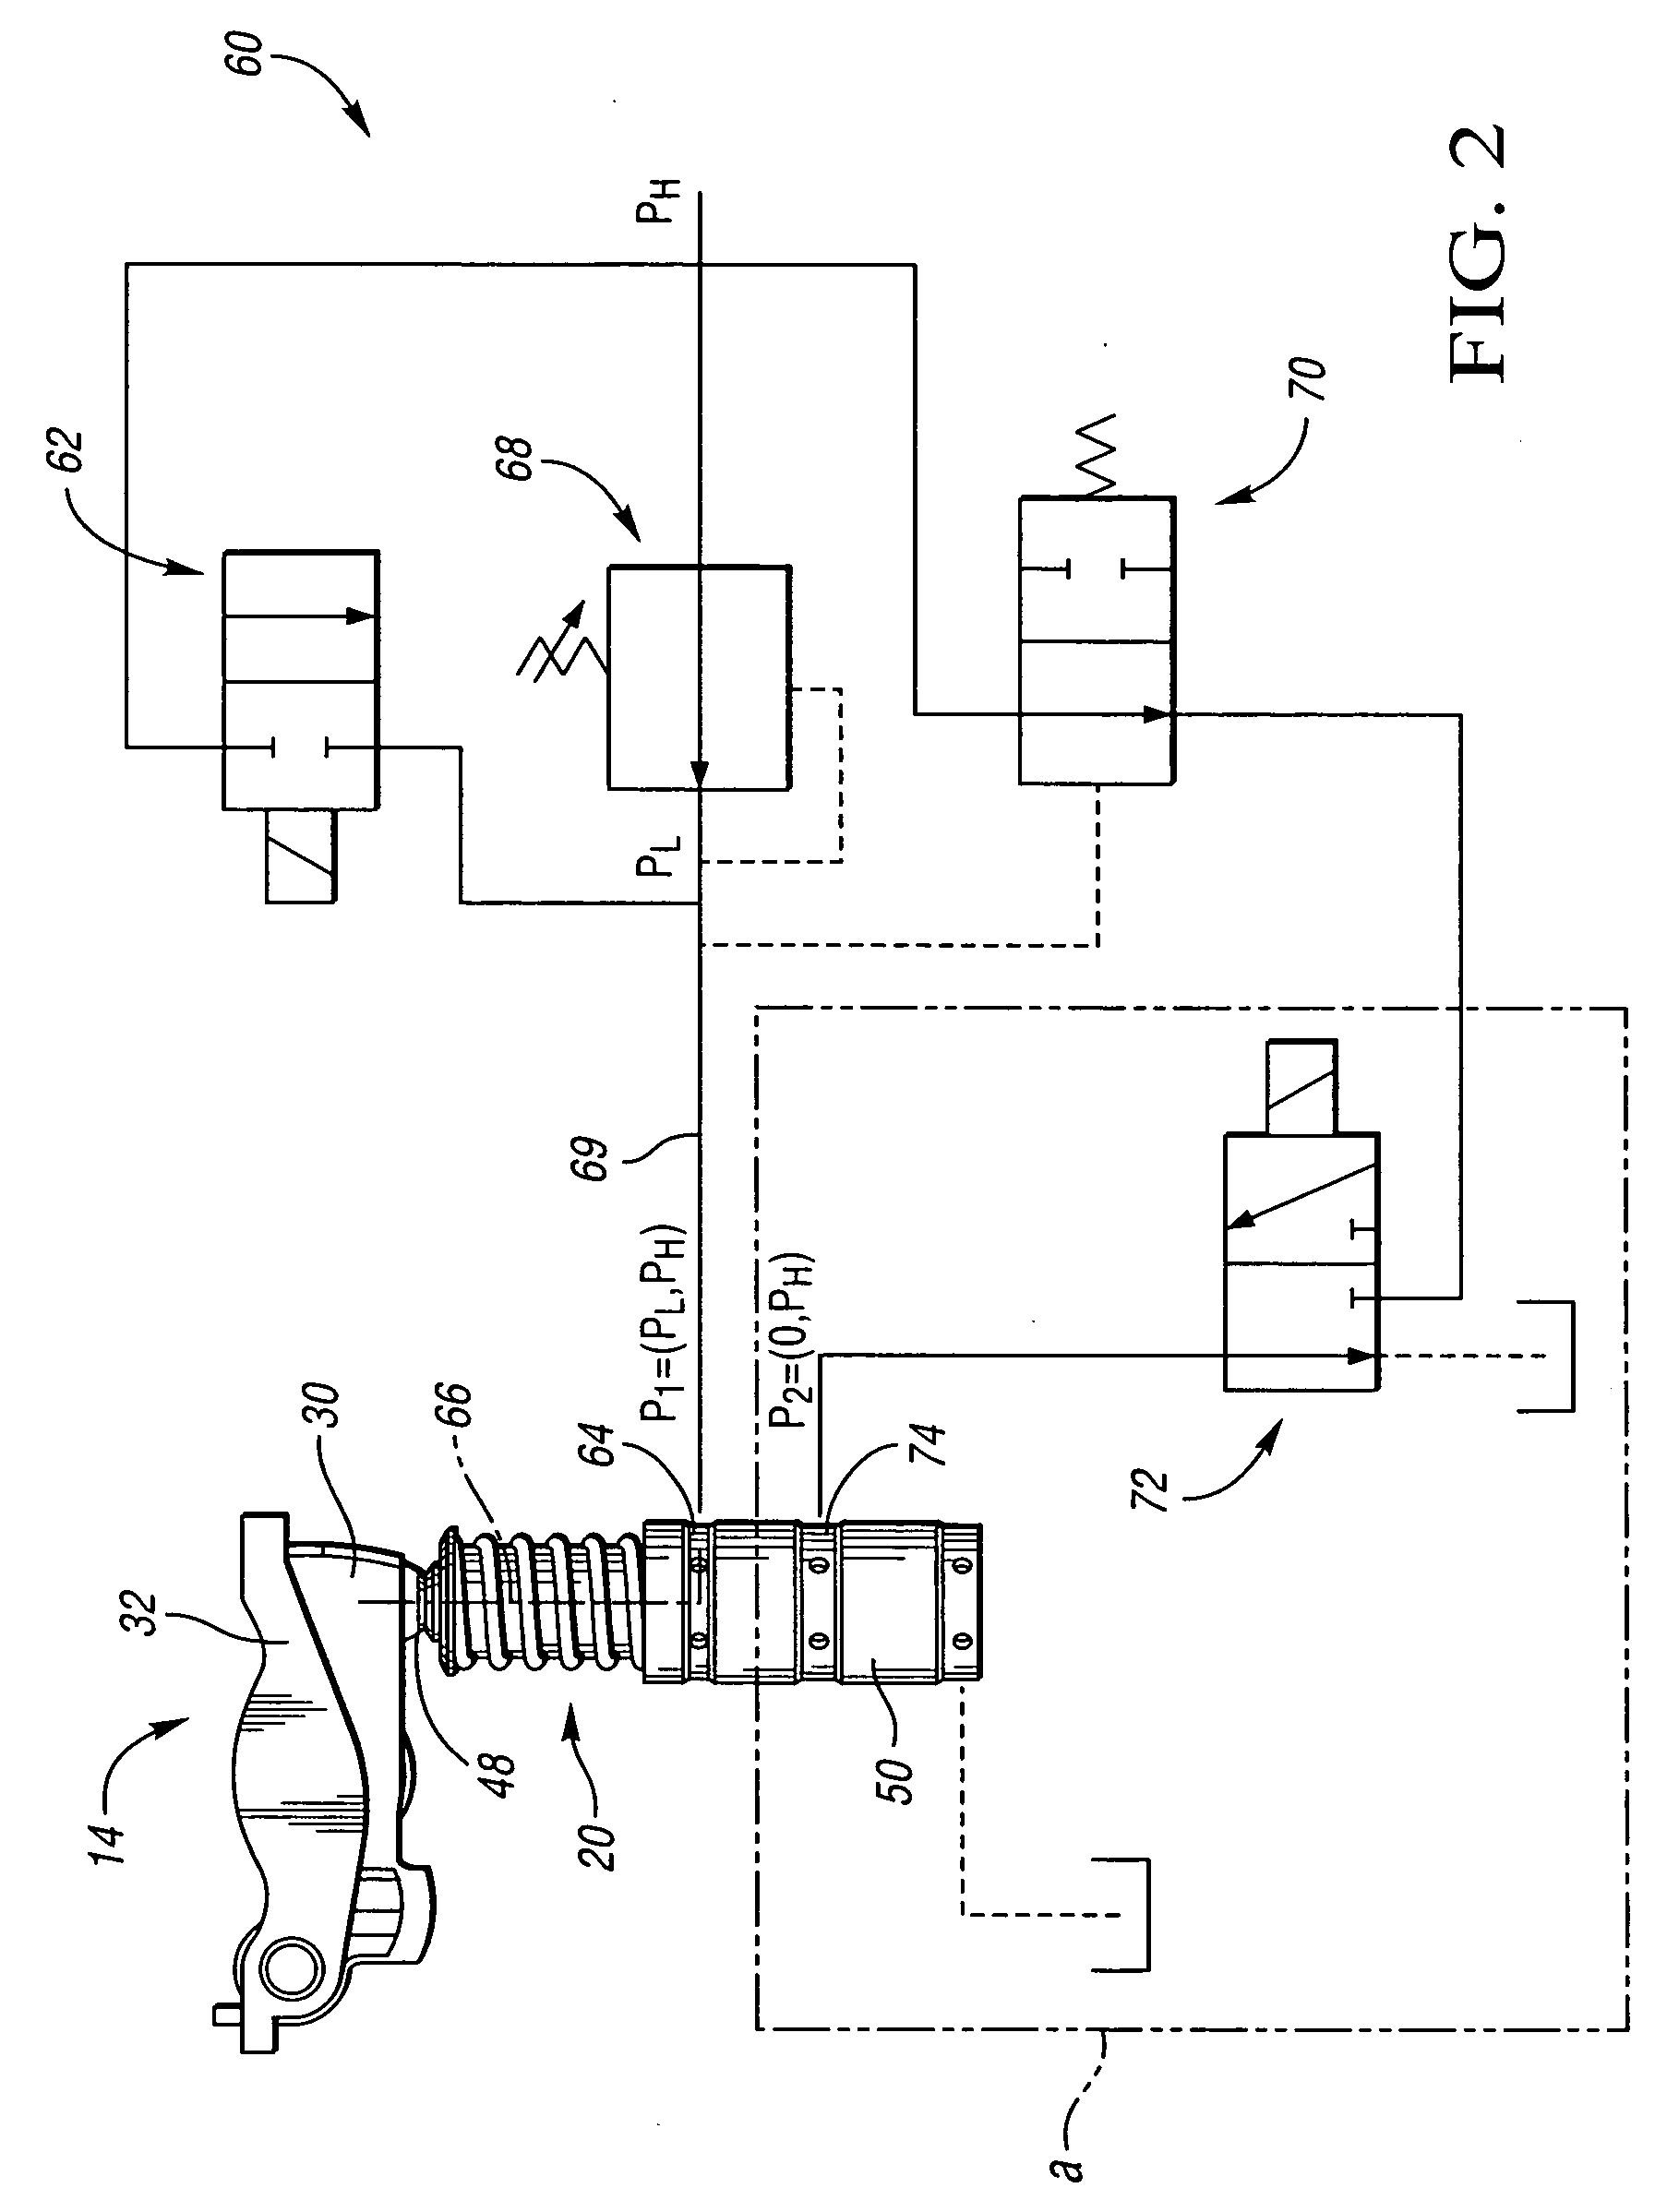 Valvetrain with two-step switchable rocker and deactivating stationary lash adjuster